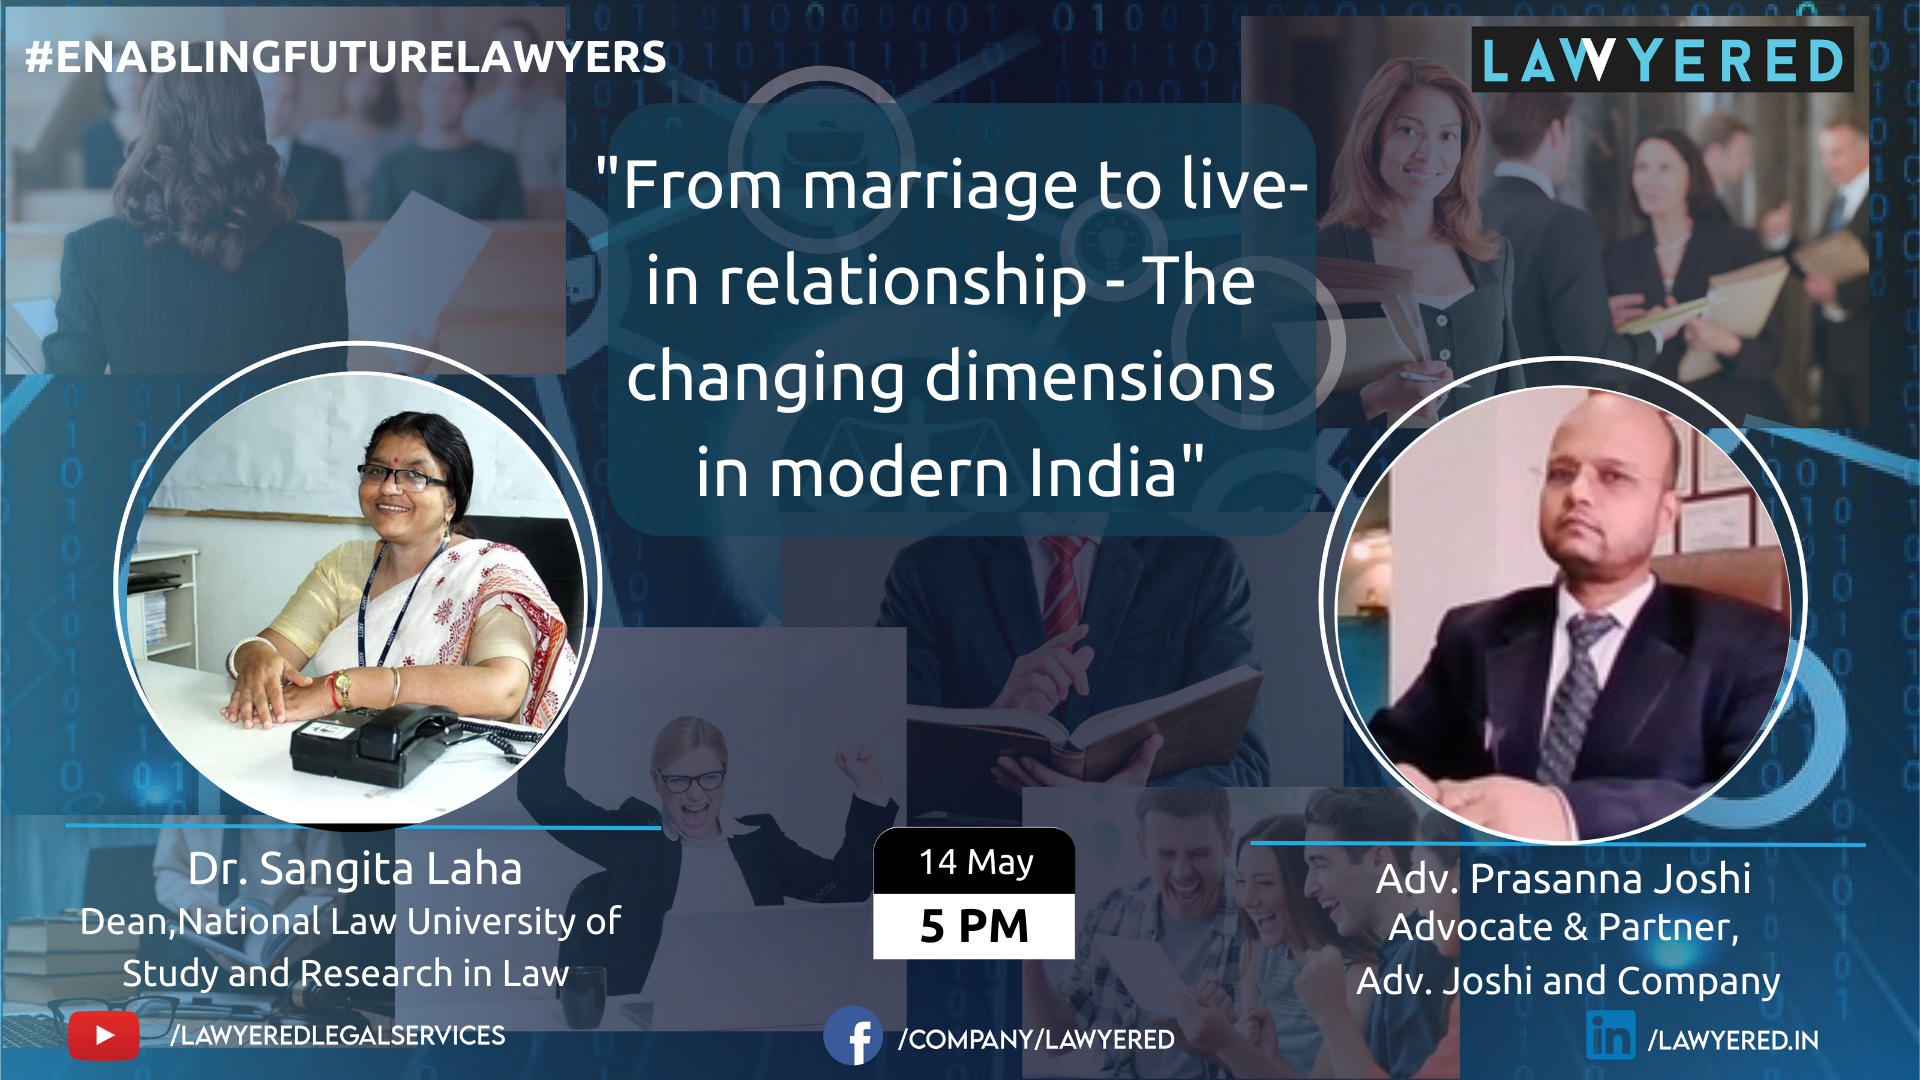 From marriage to live-in relationship - Changing dimensions in modern India #EnablingFutureLawyers with Adv. Prasanna Joshi Sethia